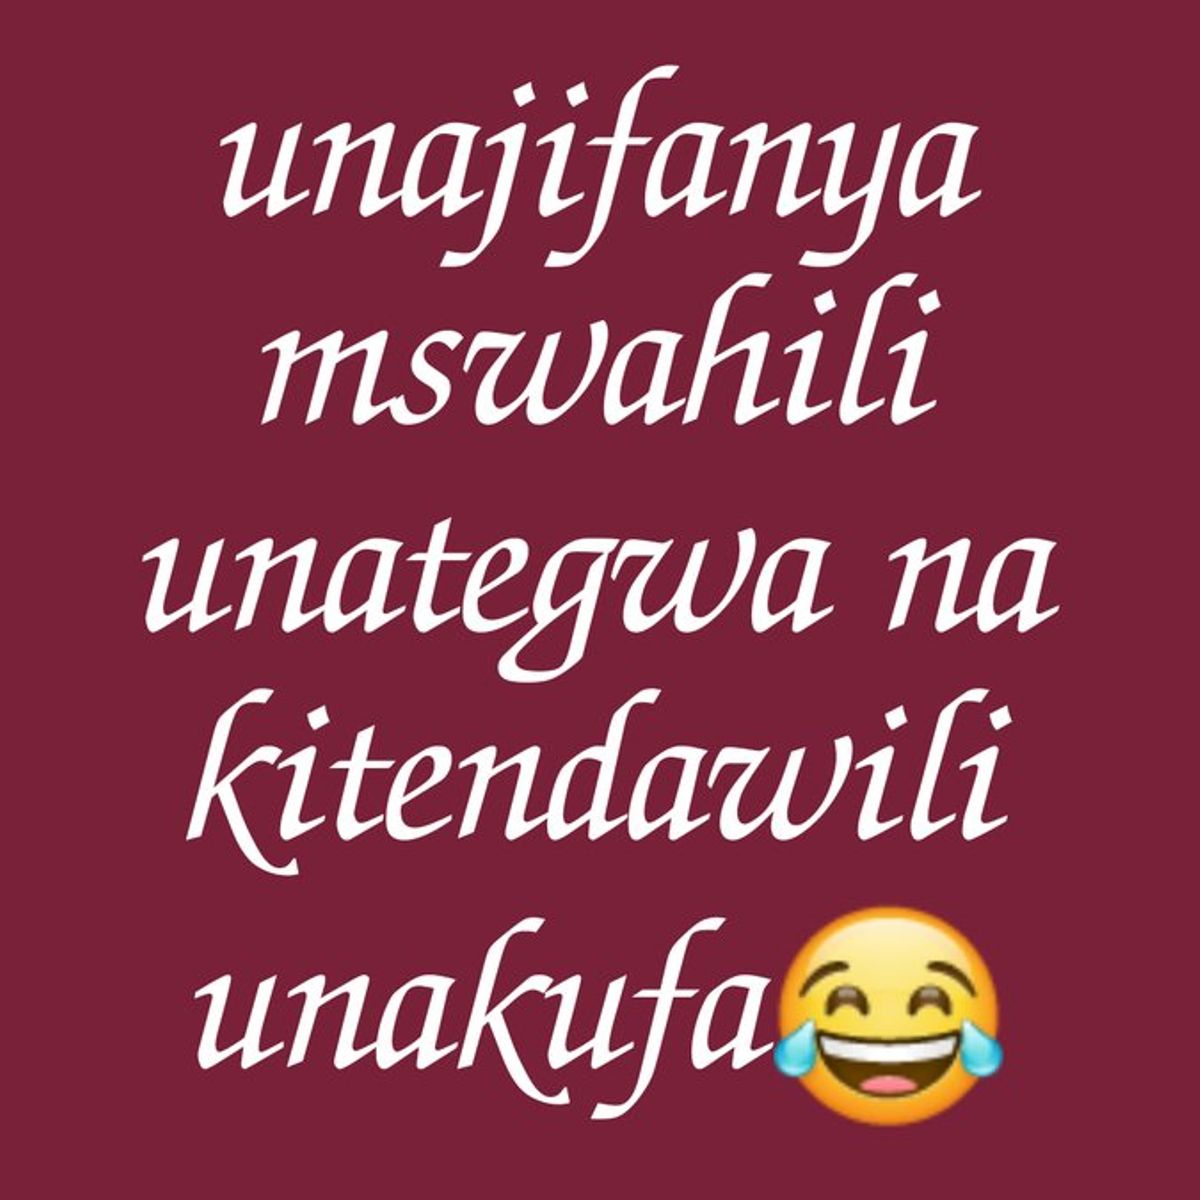 Kenyan Funny Jokes Images Memes Funny Videos For Android